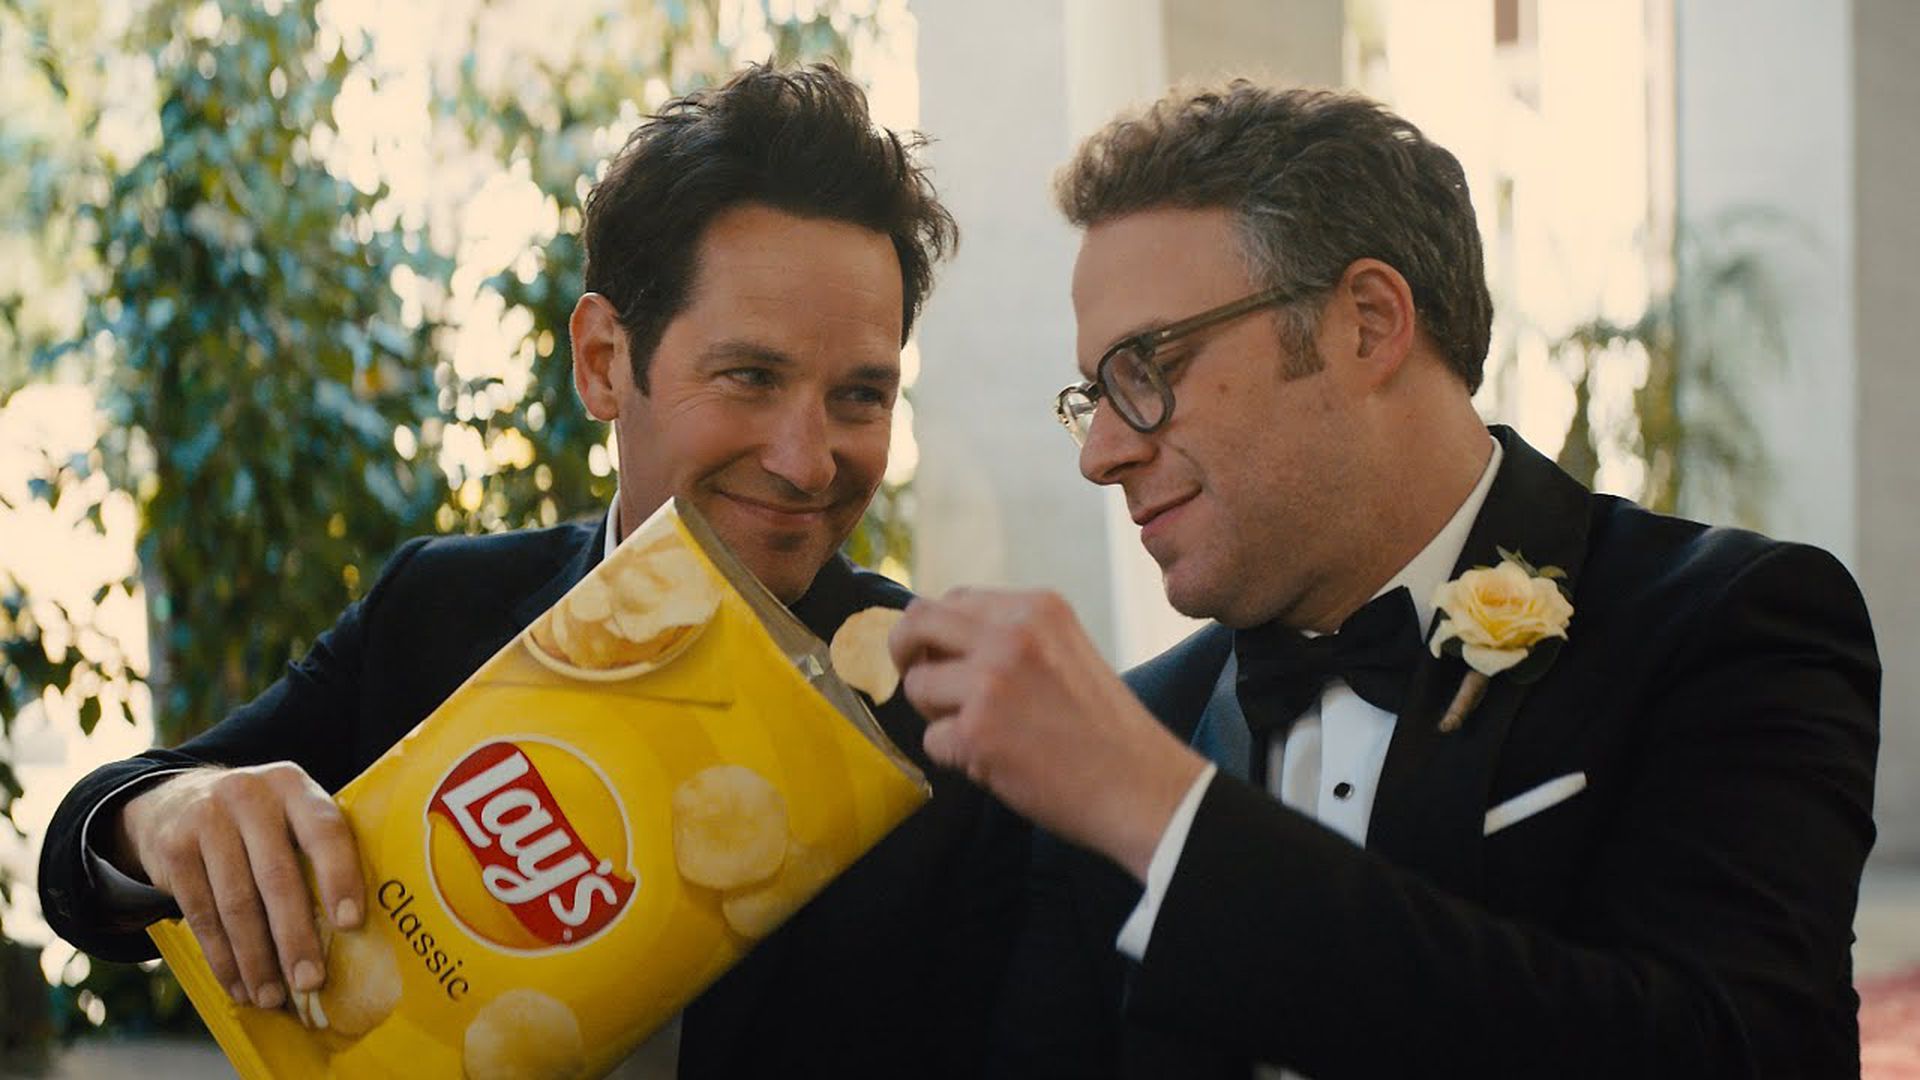 Paul Rudd and Seth Rogen in a spot for Lay's.